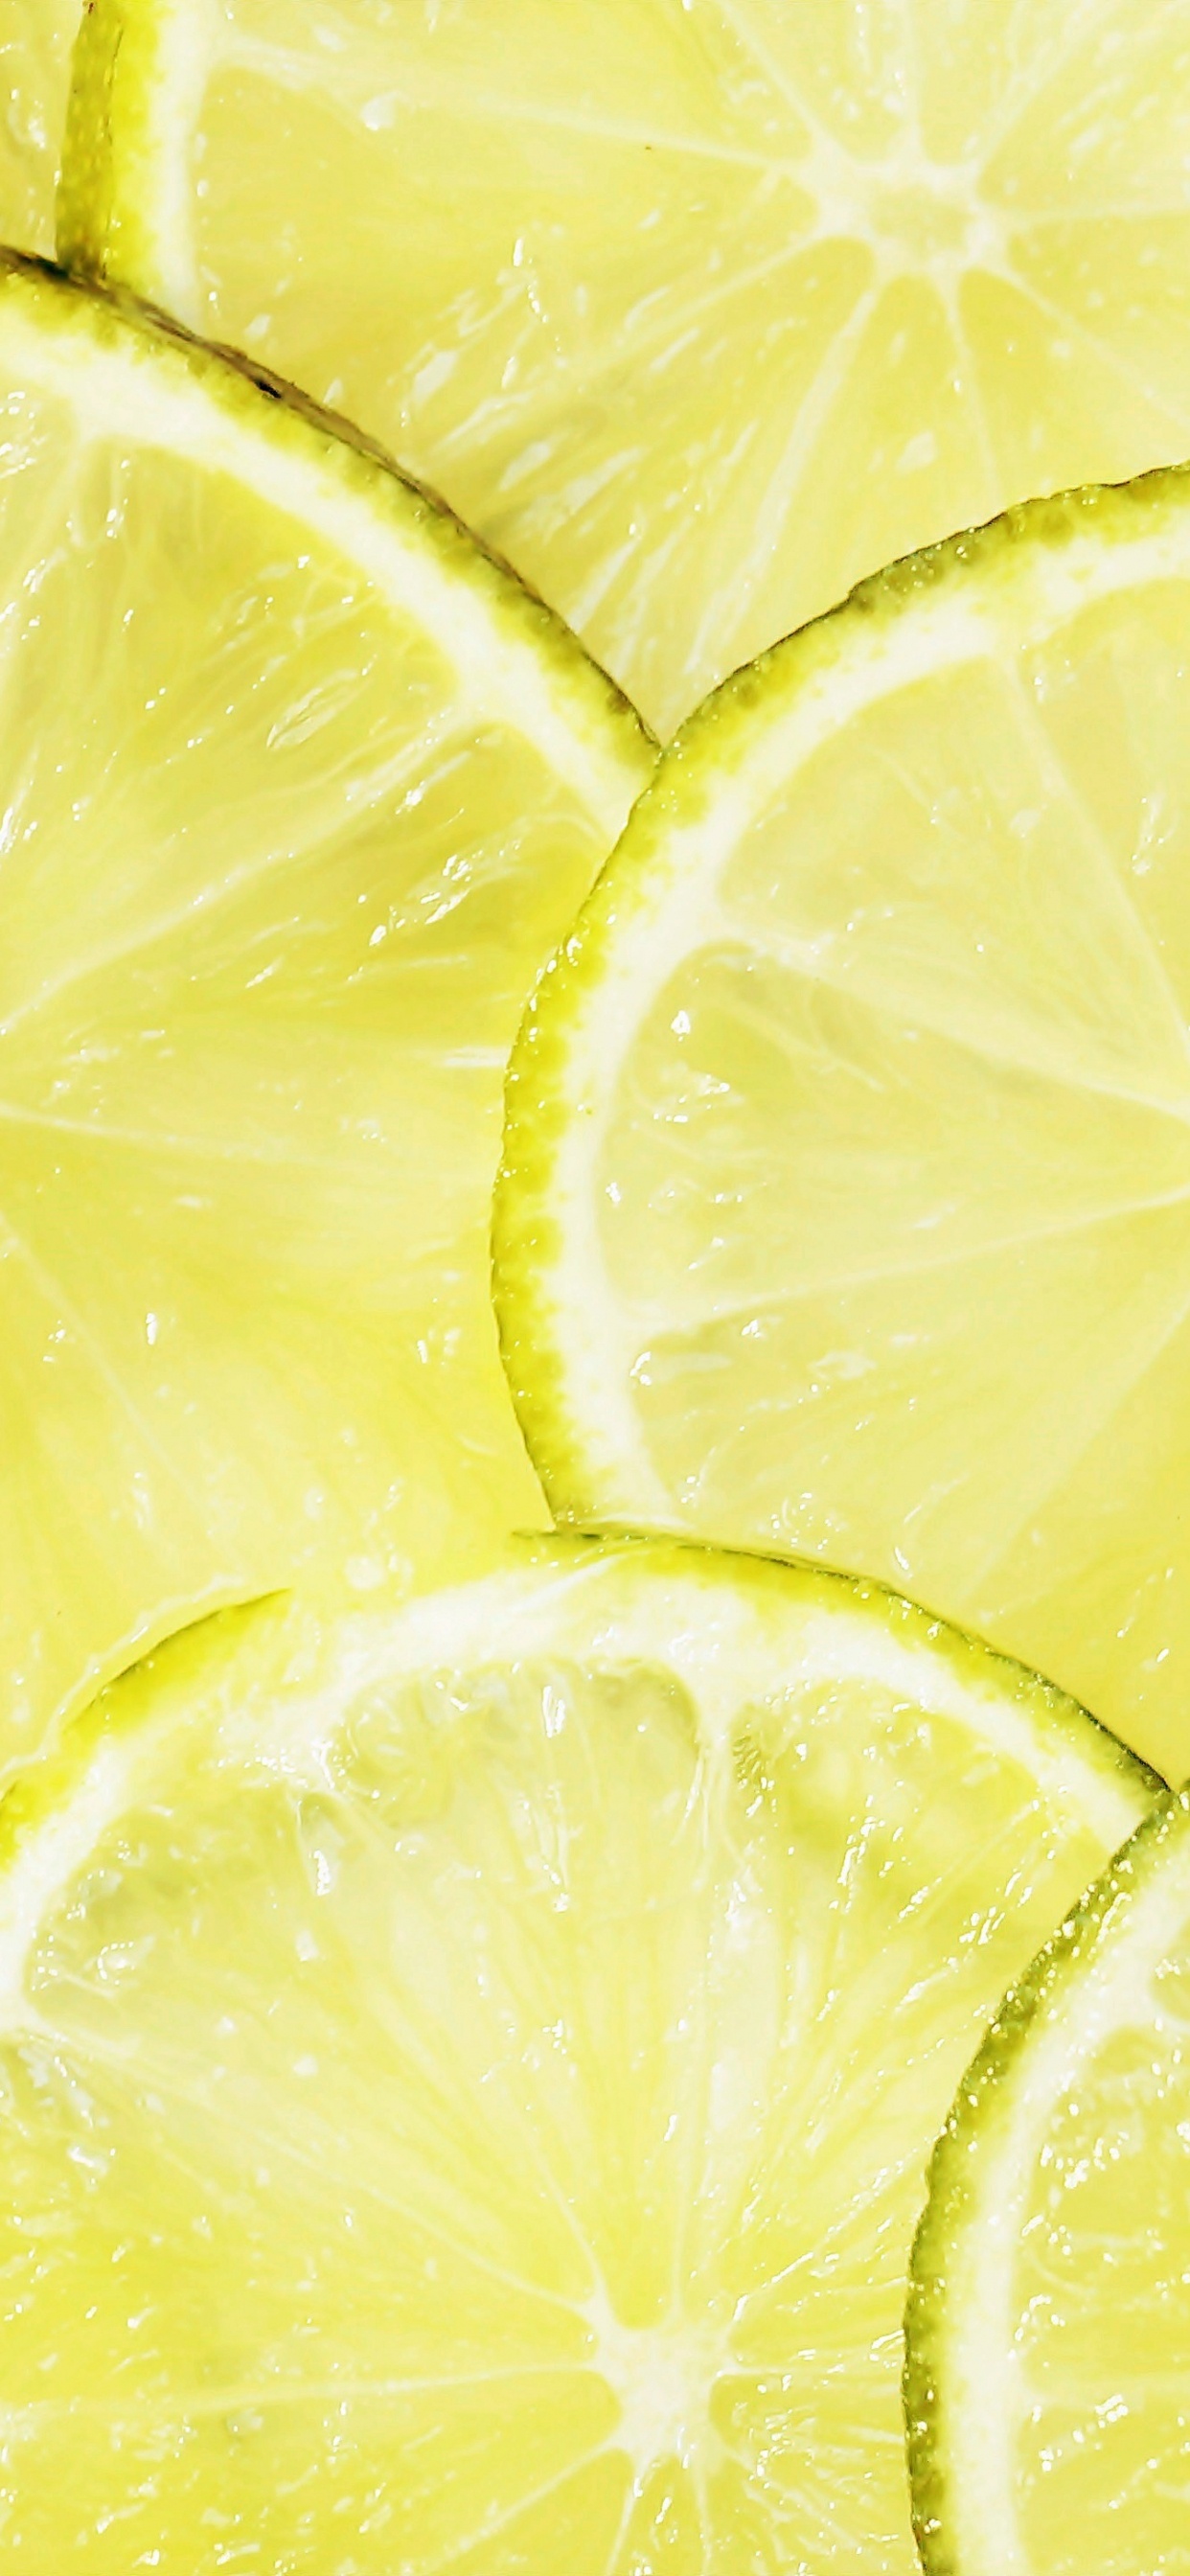 Yellow Lemon Fruit With Water Droplets. Wallpaper in 1242x2688 Resolution